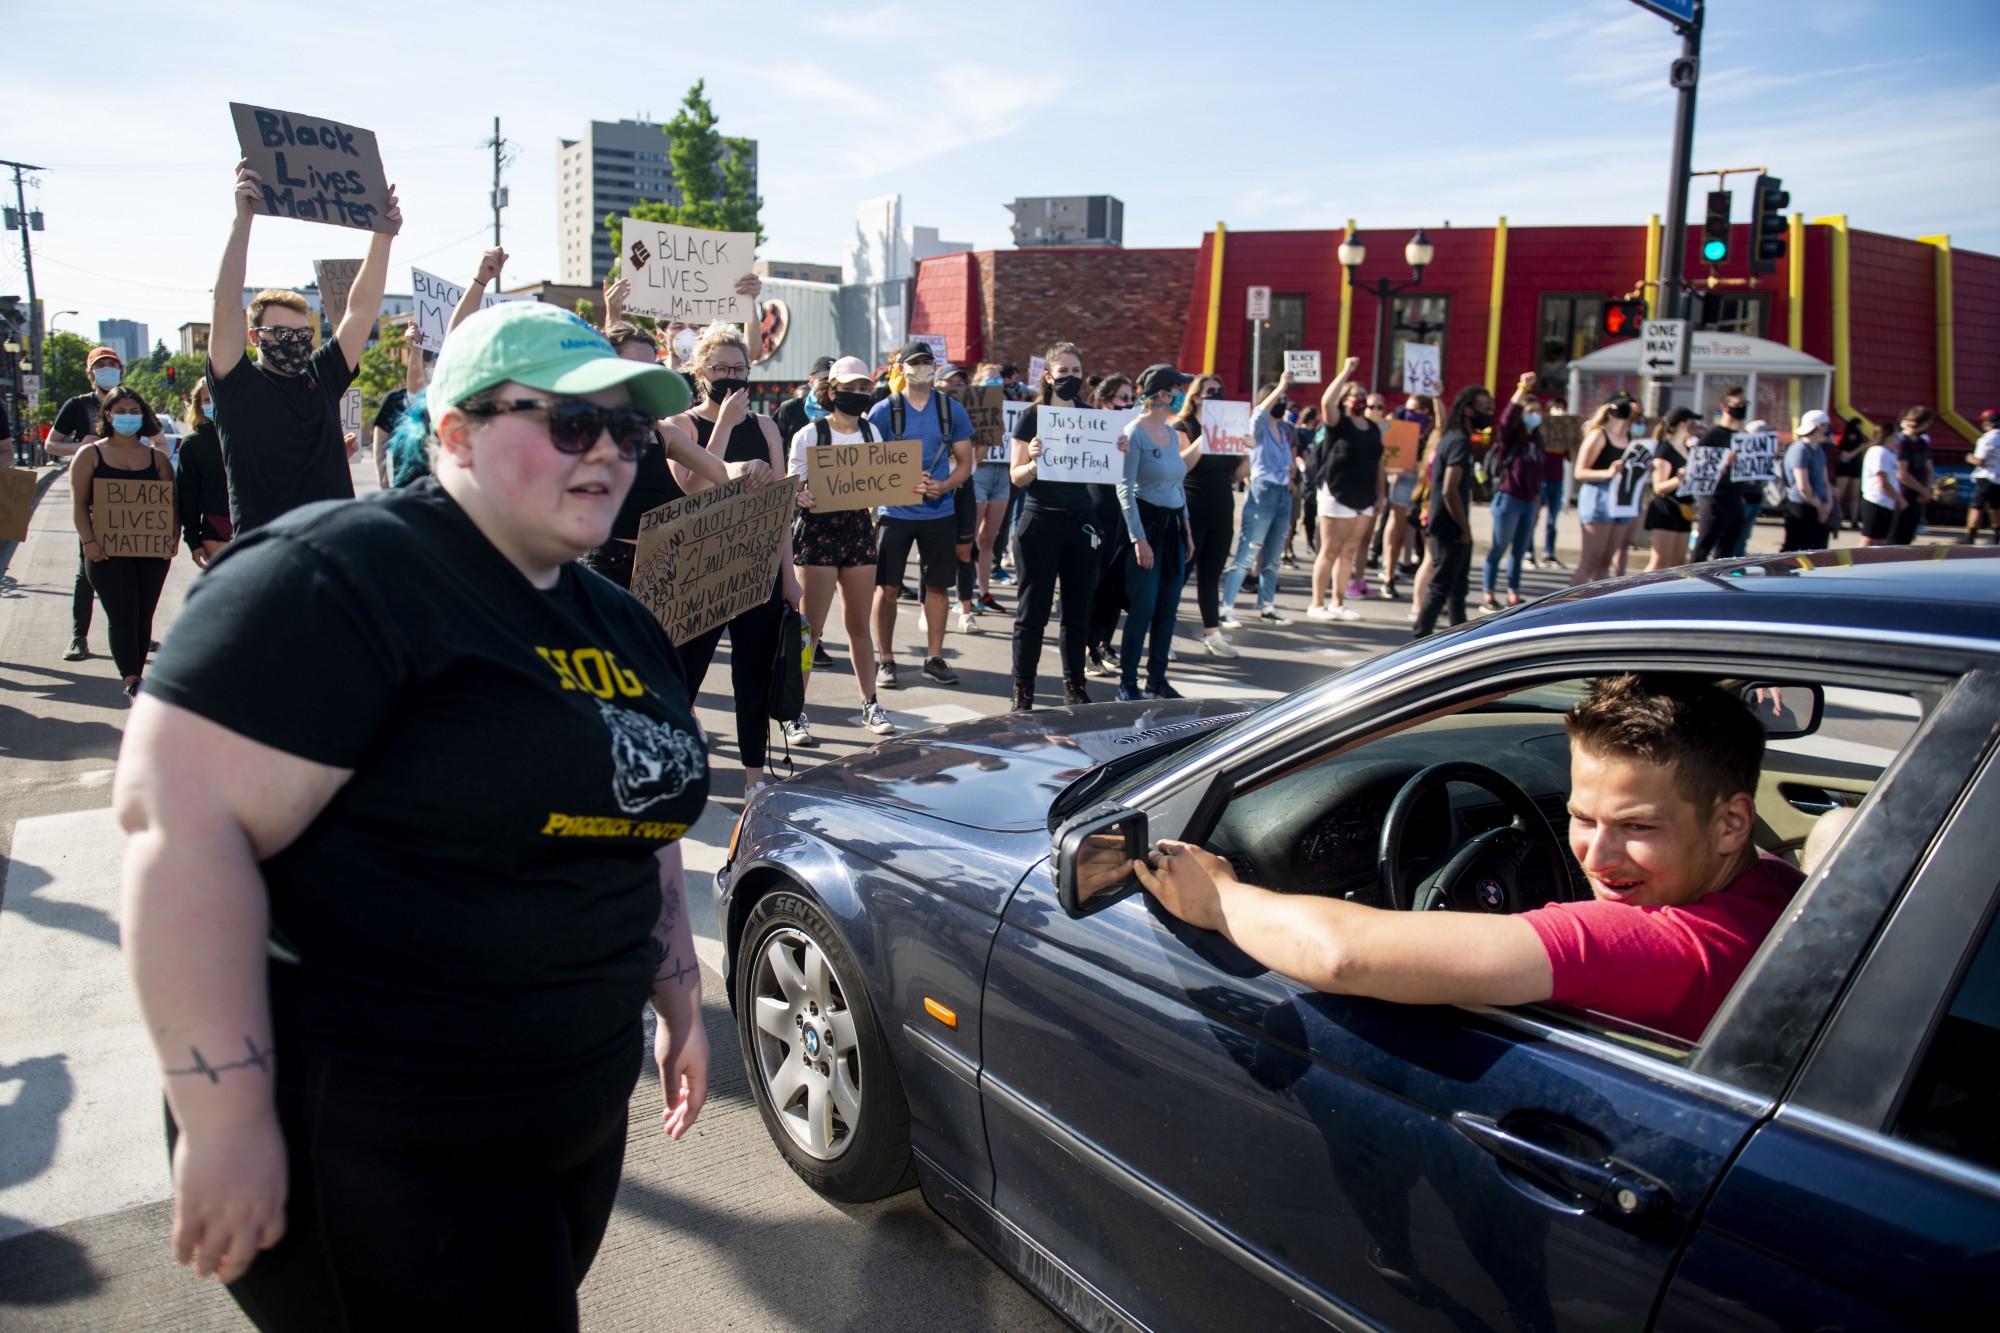 Students protest at the entrance of Dinkytown blocking traffic from passing through on SE 4th St on Sunday, May 31. Cars passing by frequently honked in support of the crowd. 